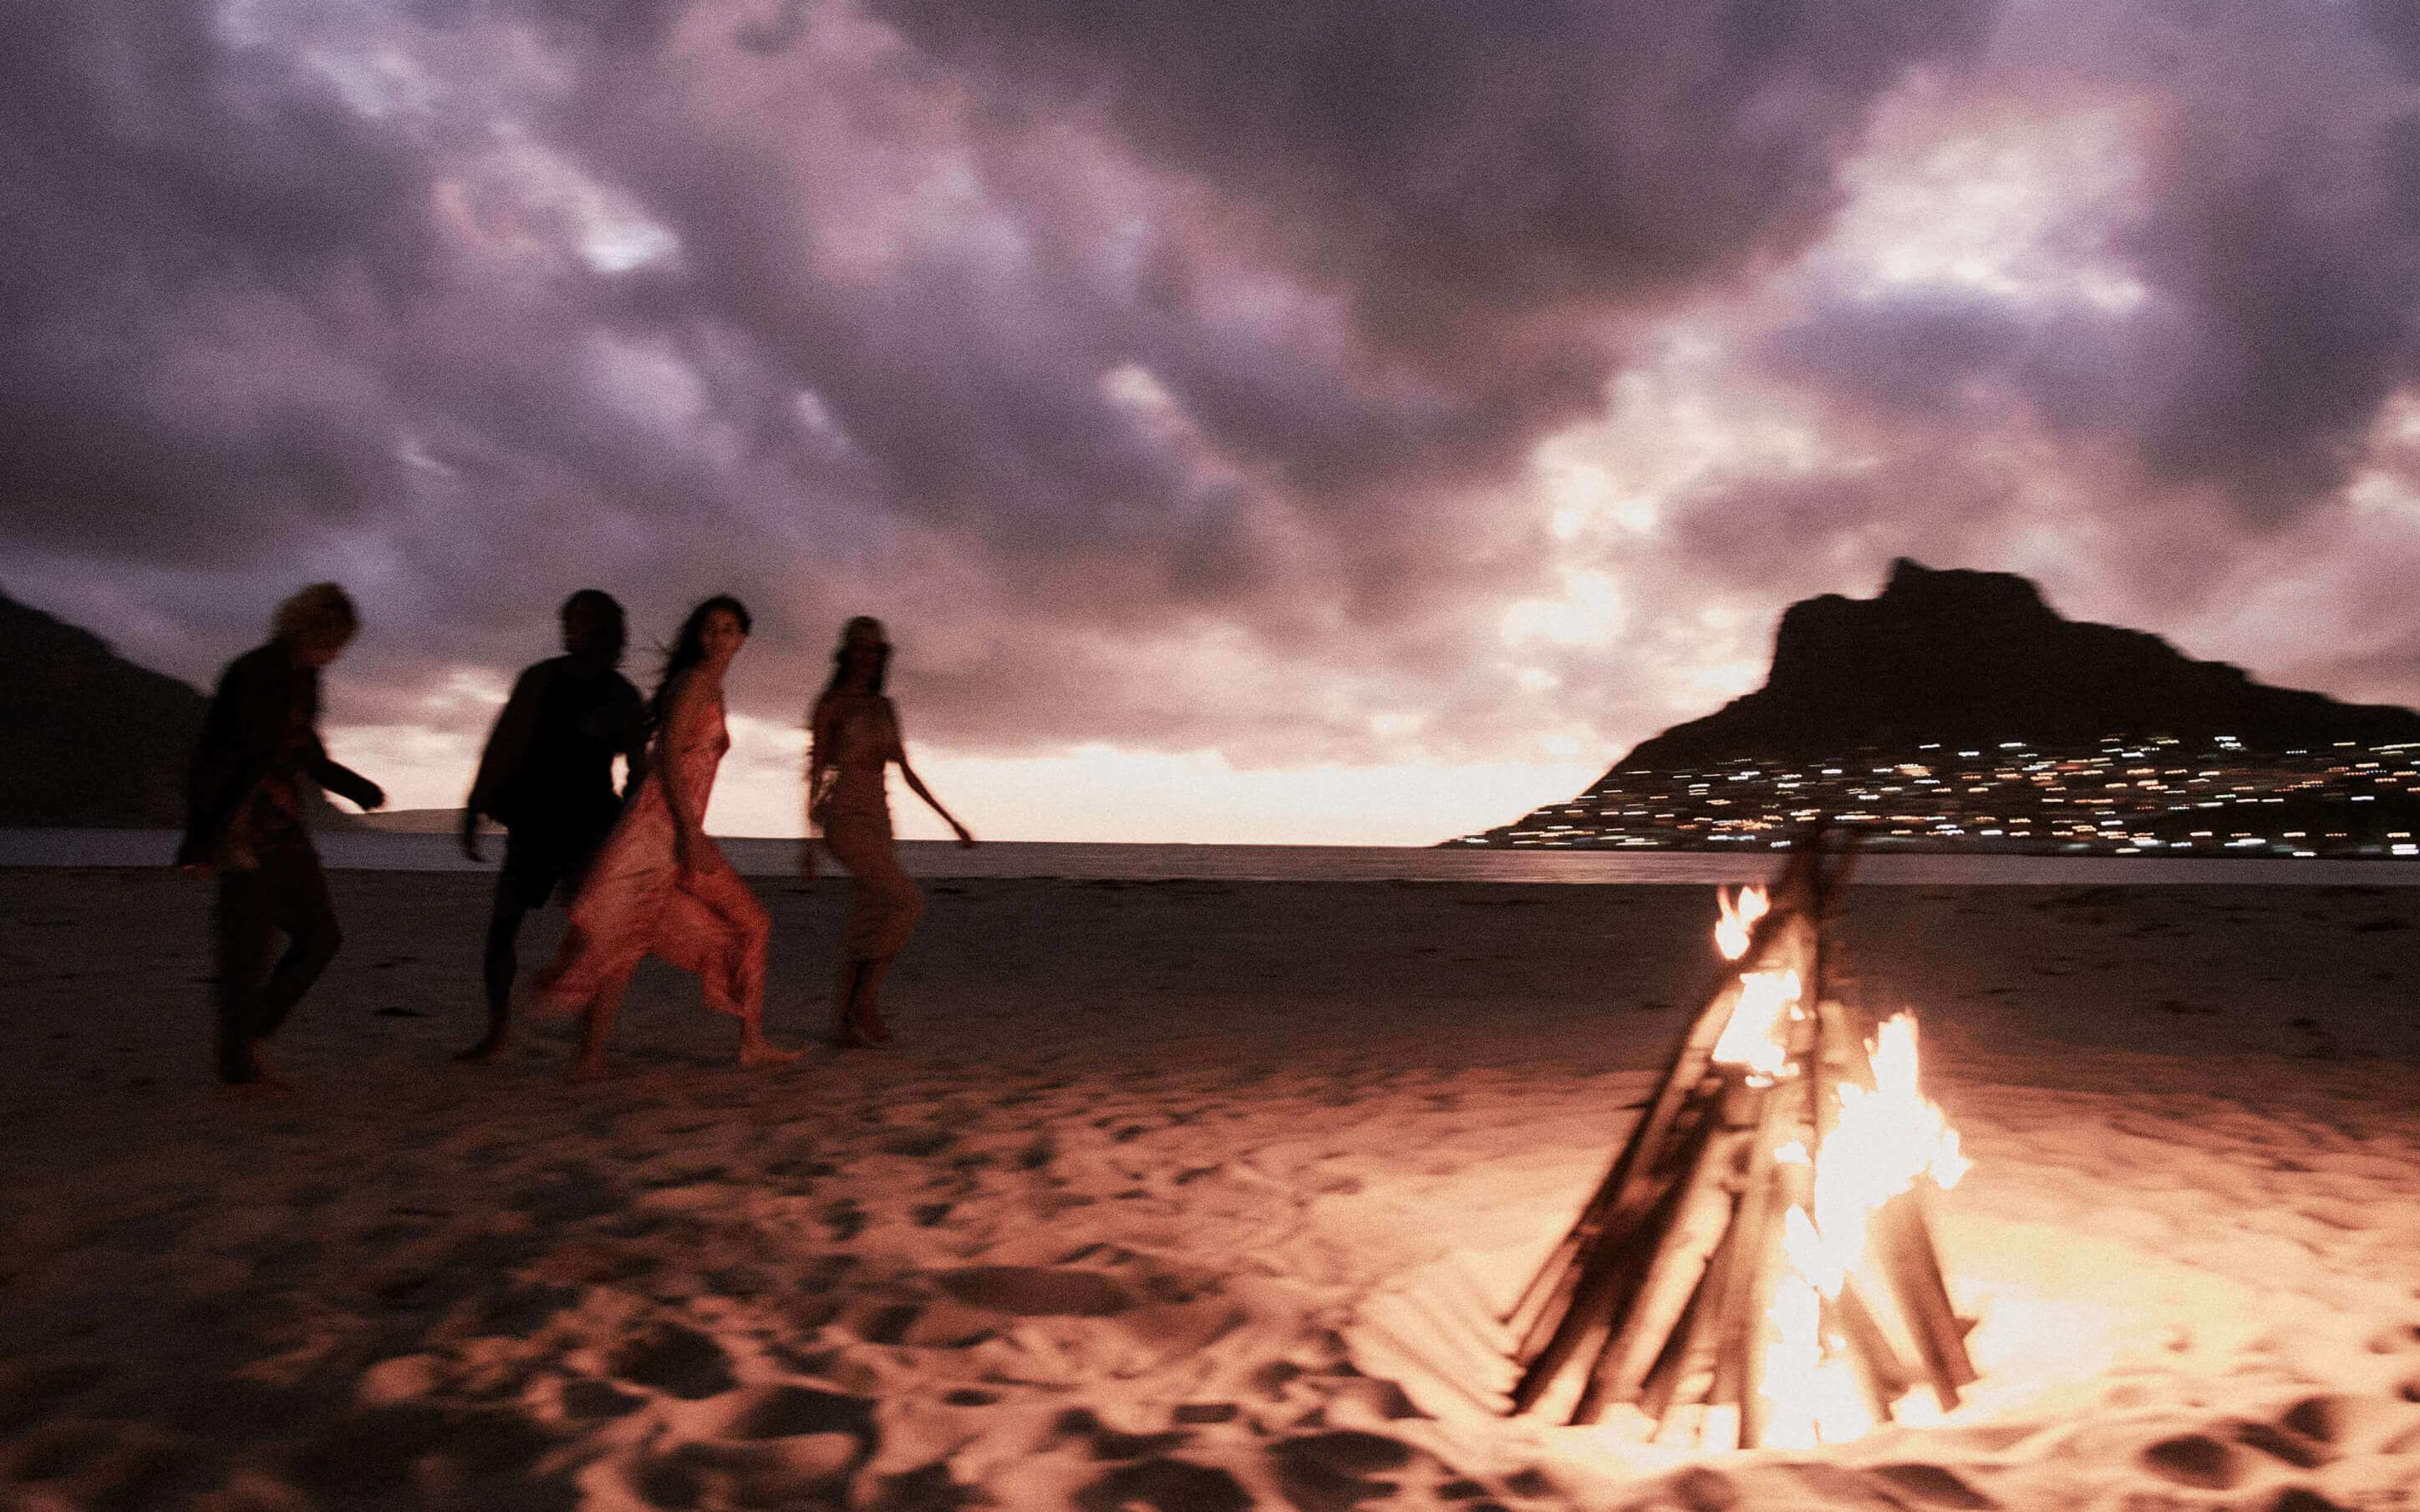 Men and women walking past a bonfire on a beach at night